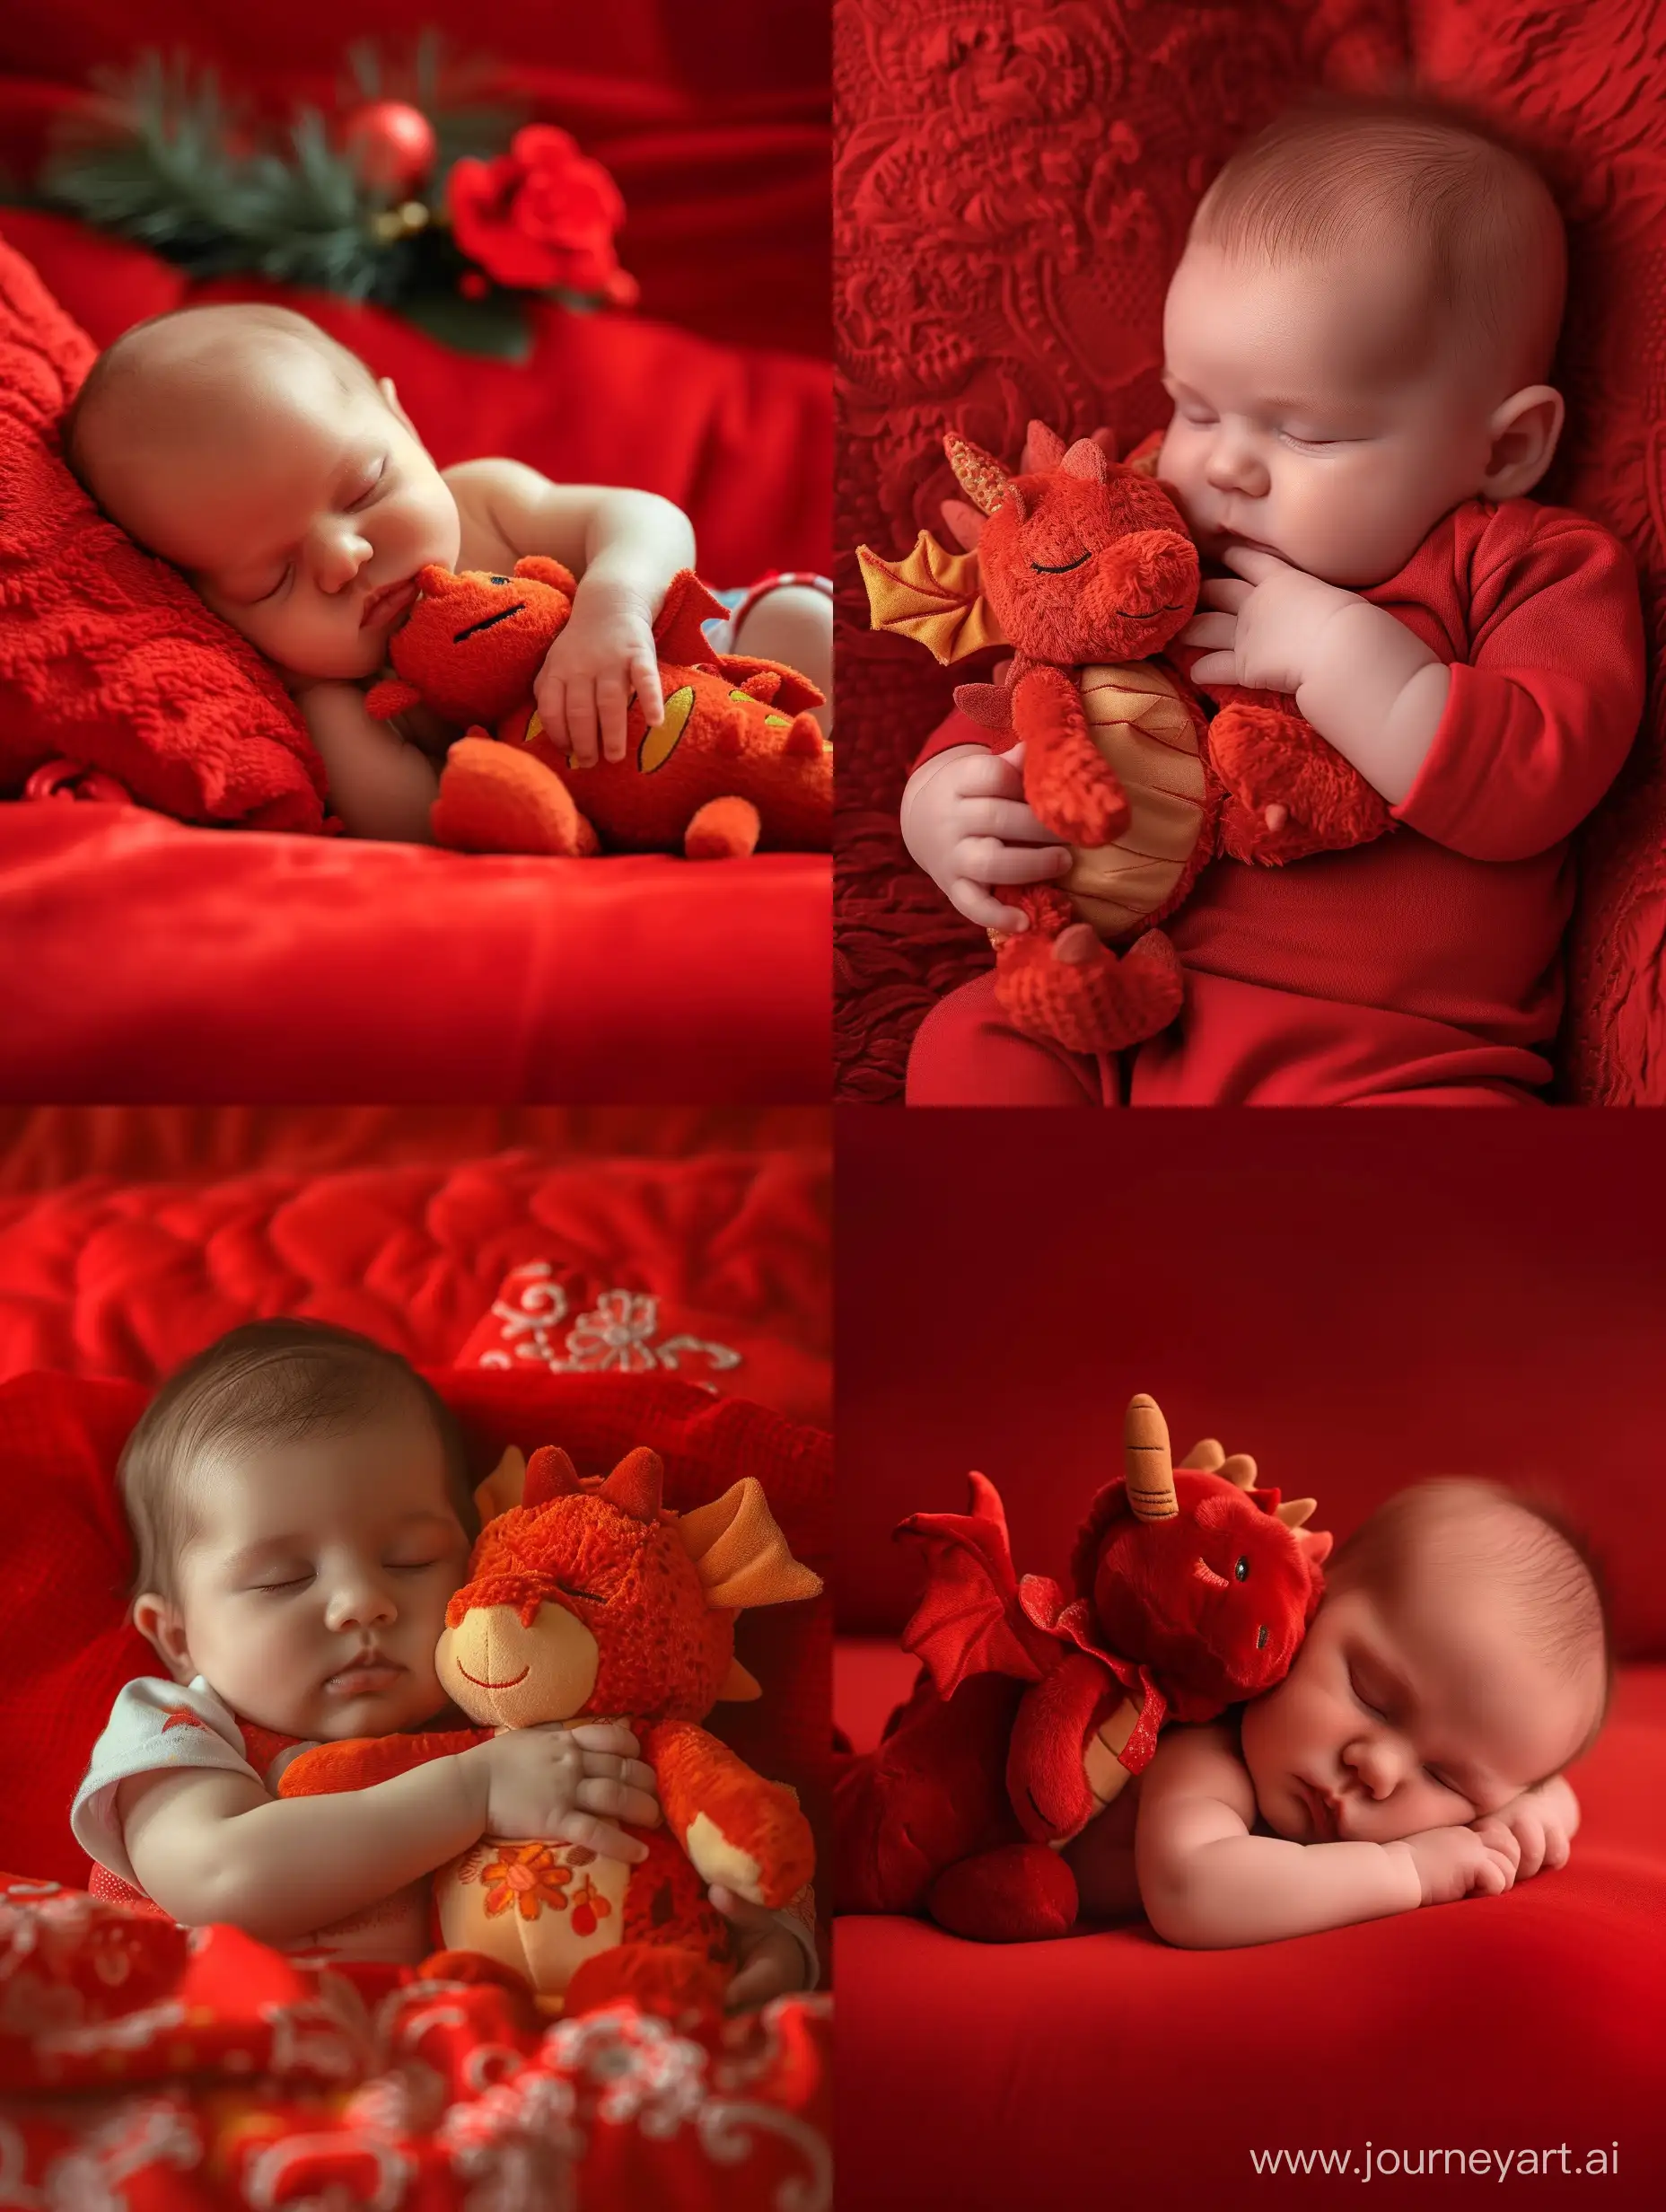 A beautiful scene unfolds as a baby lovingly cradles a dragon plushie while peacefully sleeping. The vibrant red theme adds an adorable and cute touch to this animated, cartoon-like setting. Captured in a portrait style, this image exudes the highest quality of 8k HDR, enhancing its stunning beauty. 